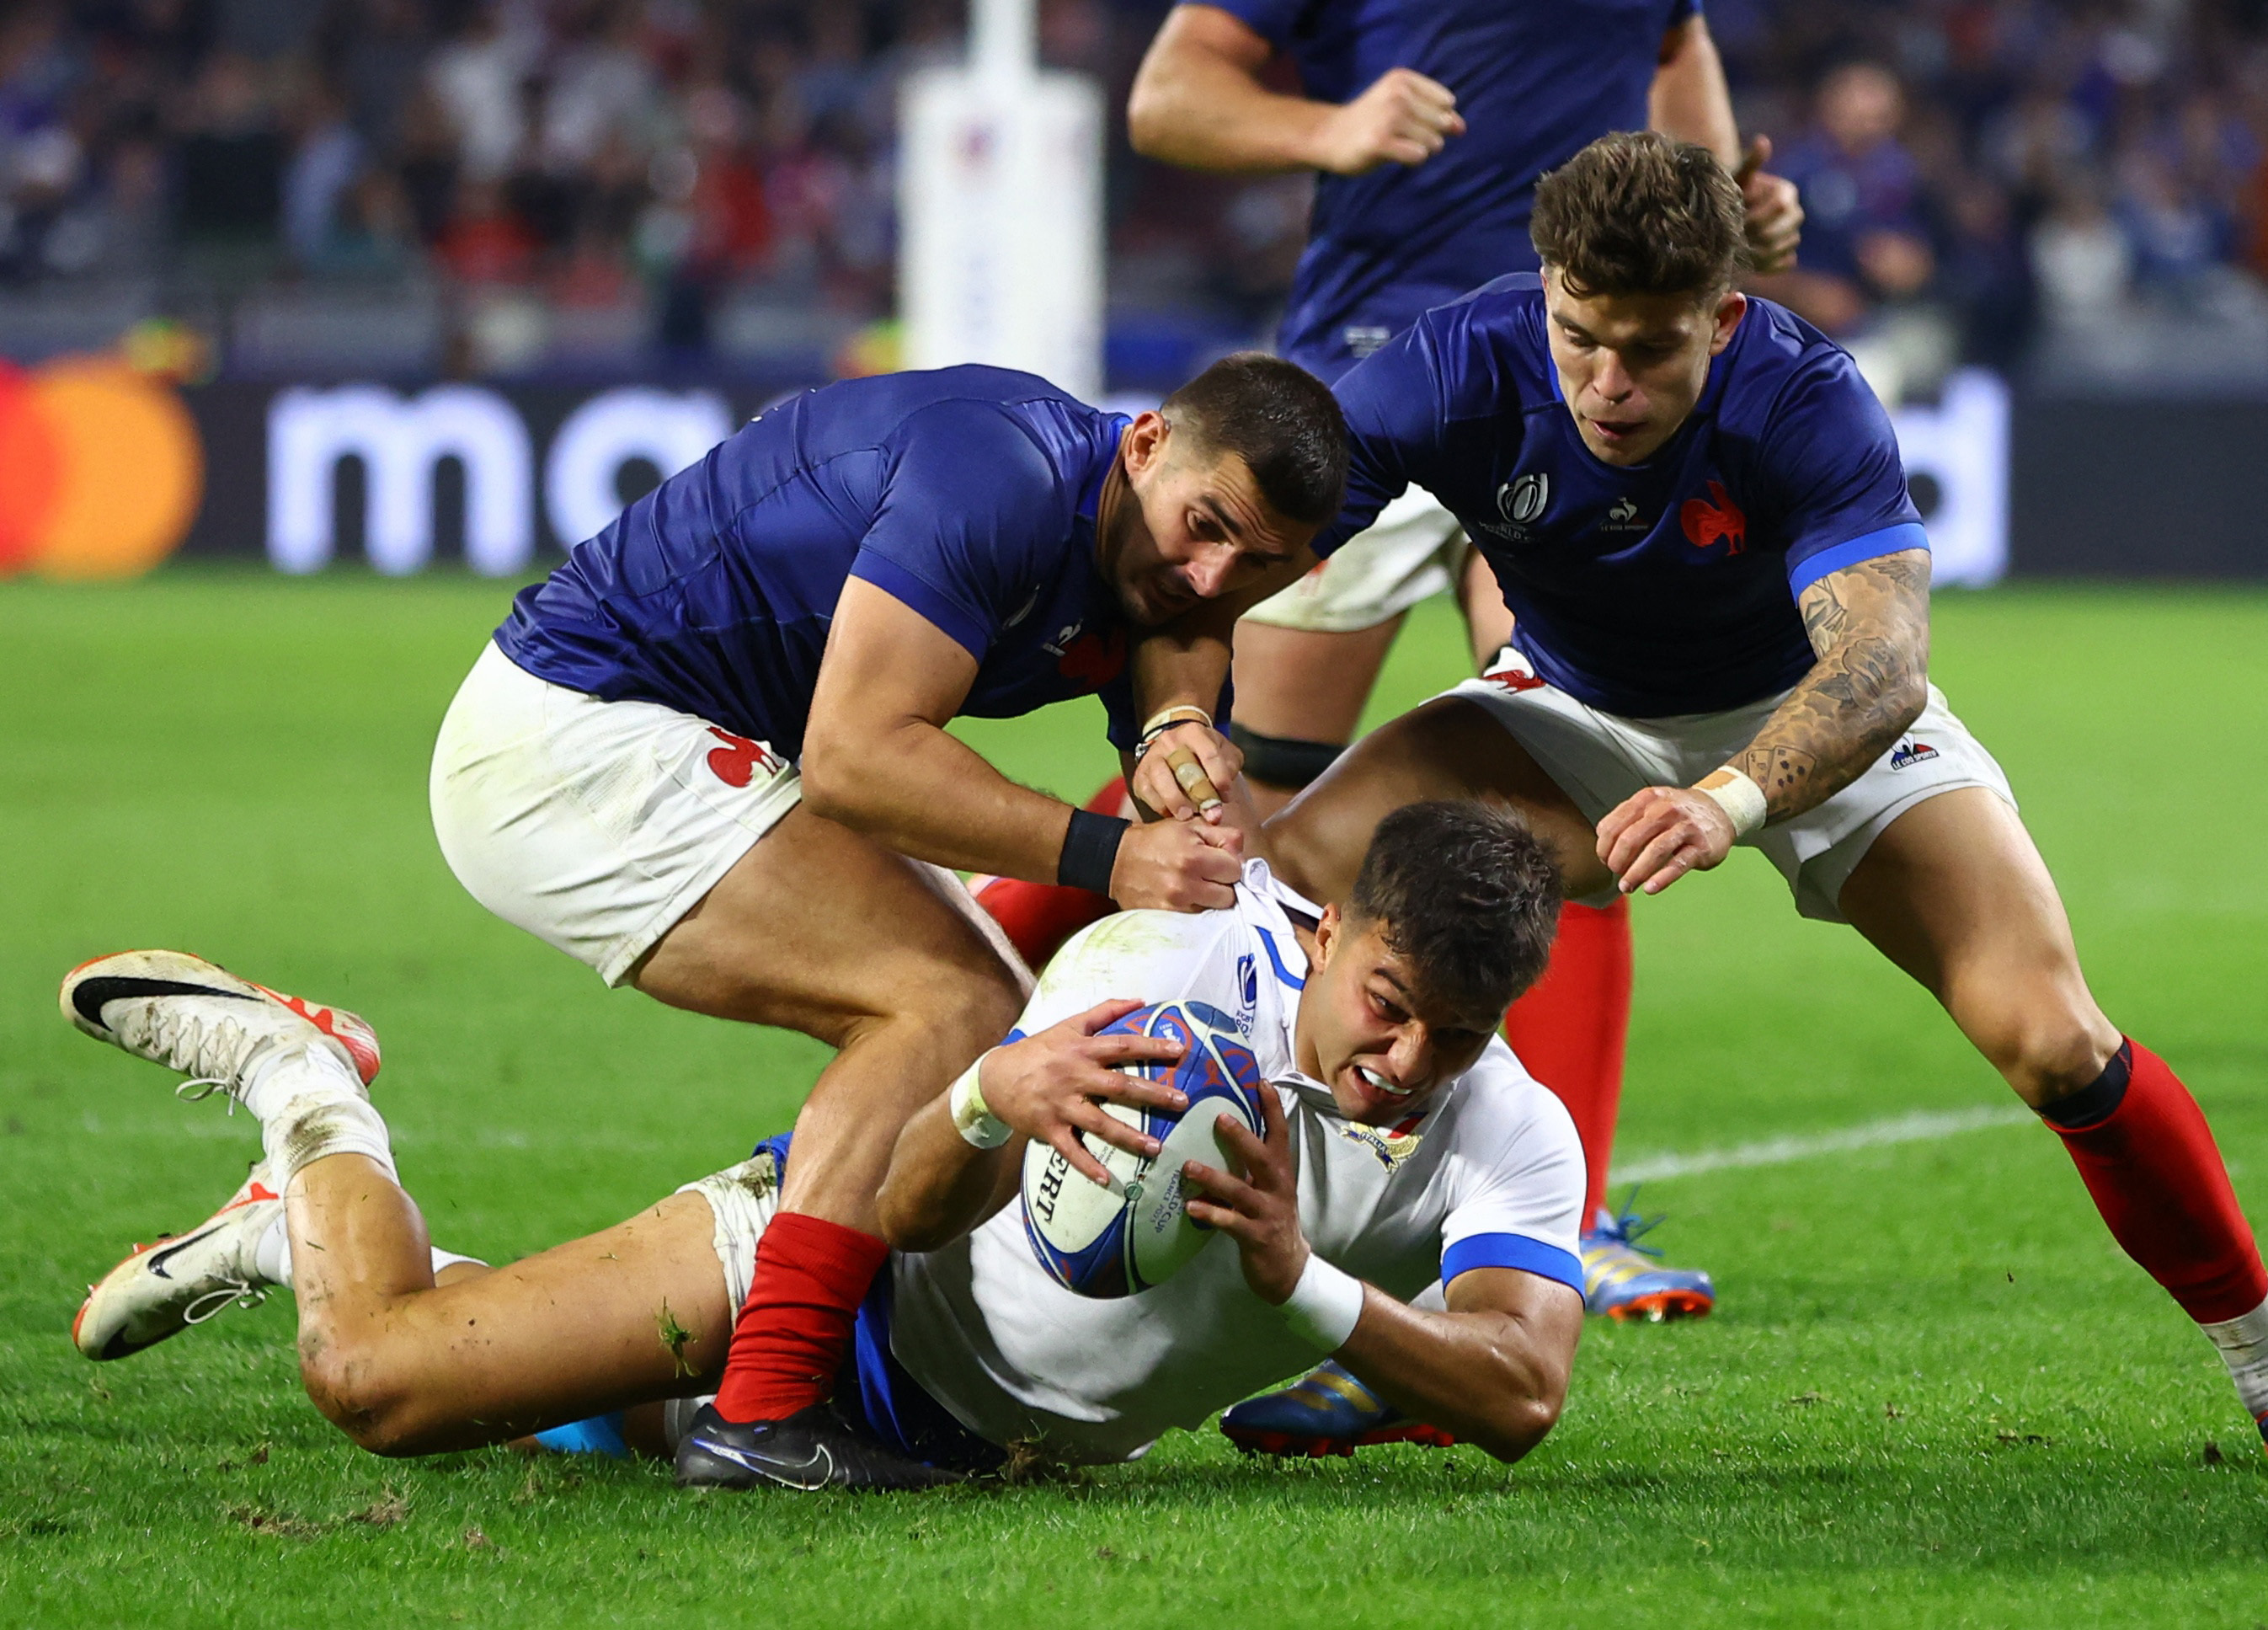 How to get last-minute tickets to the 2023 Rugby World Cup in France